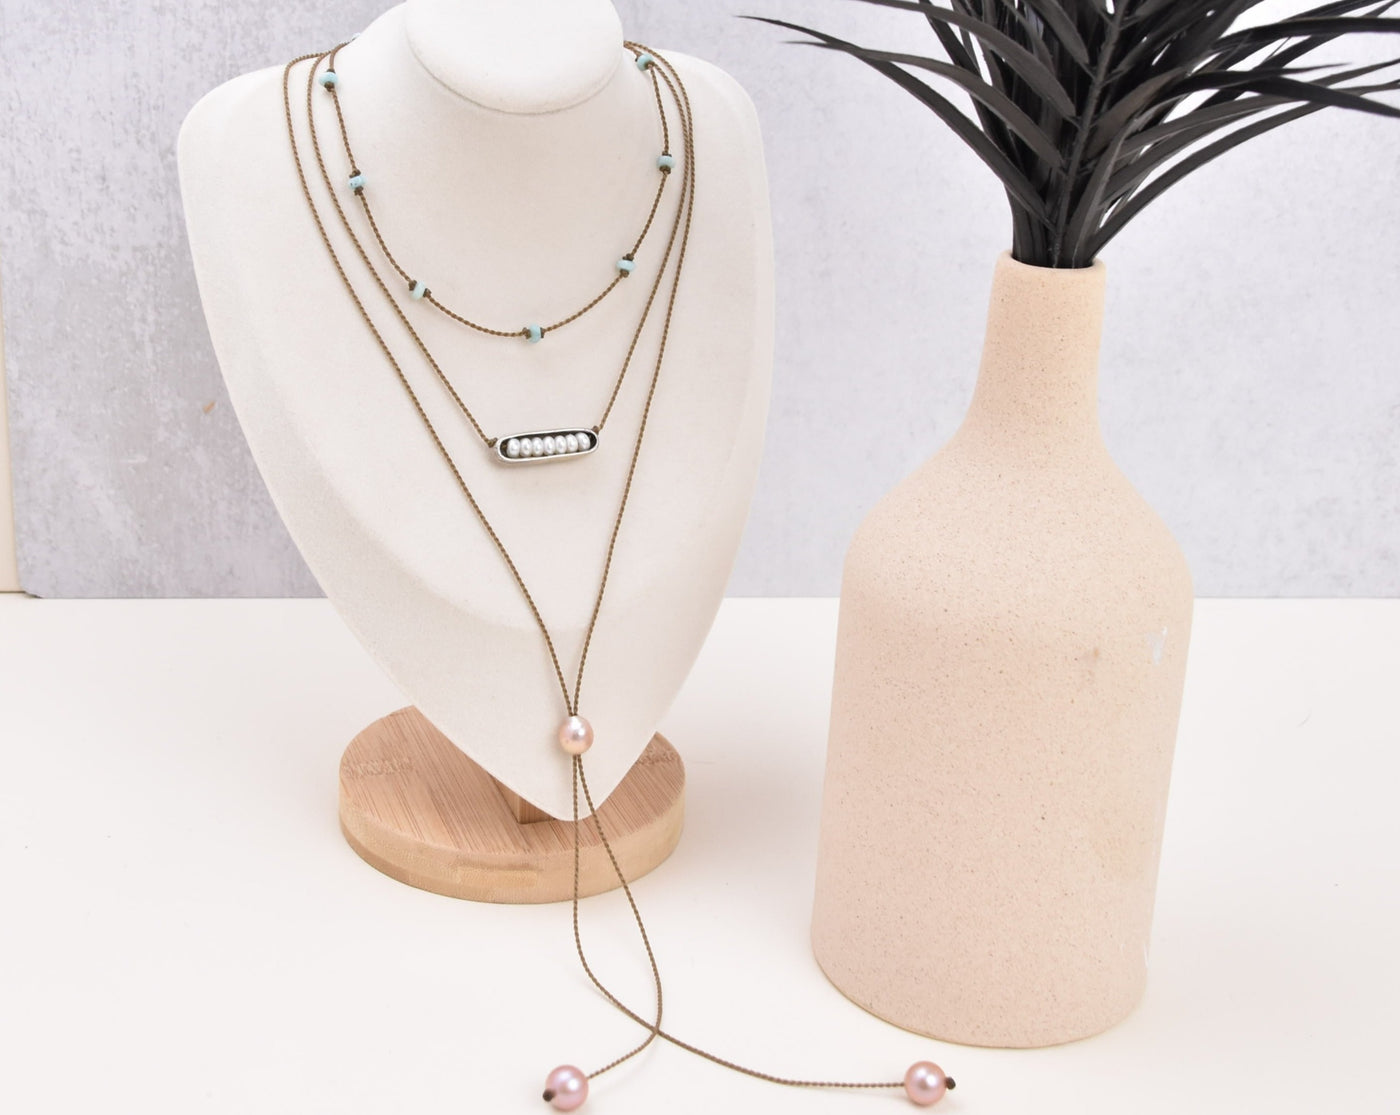 Winter Sunrise - Necklace Stack (15% off)